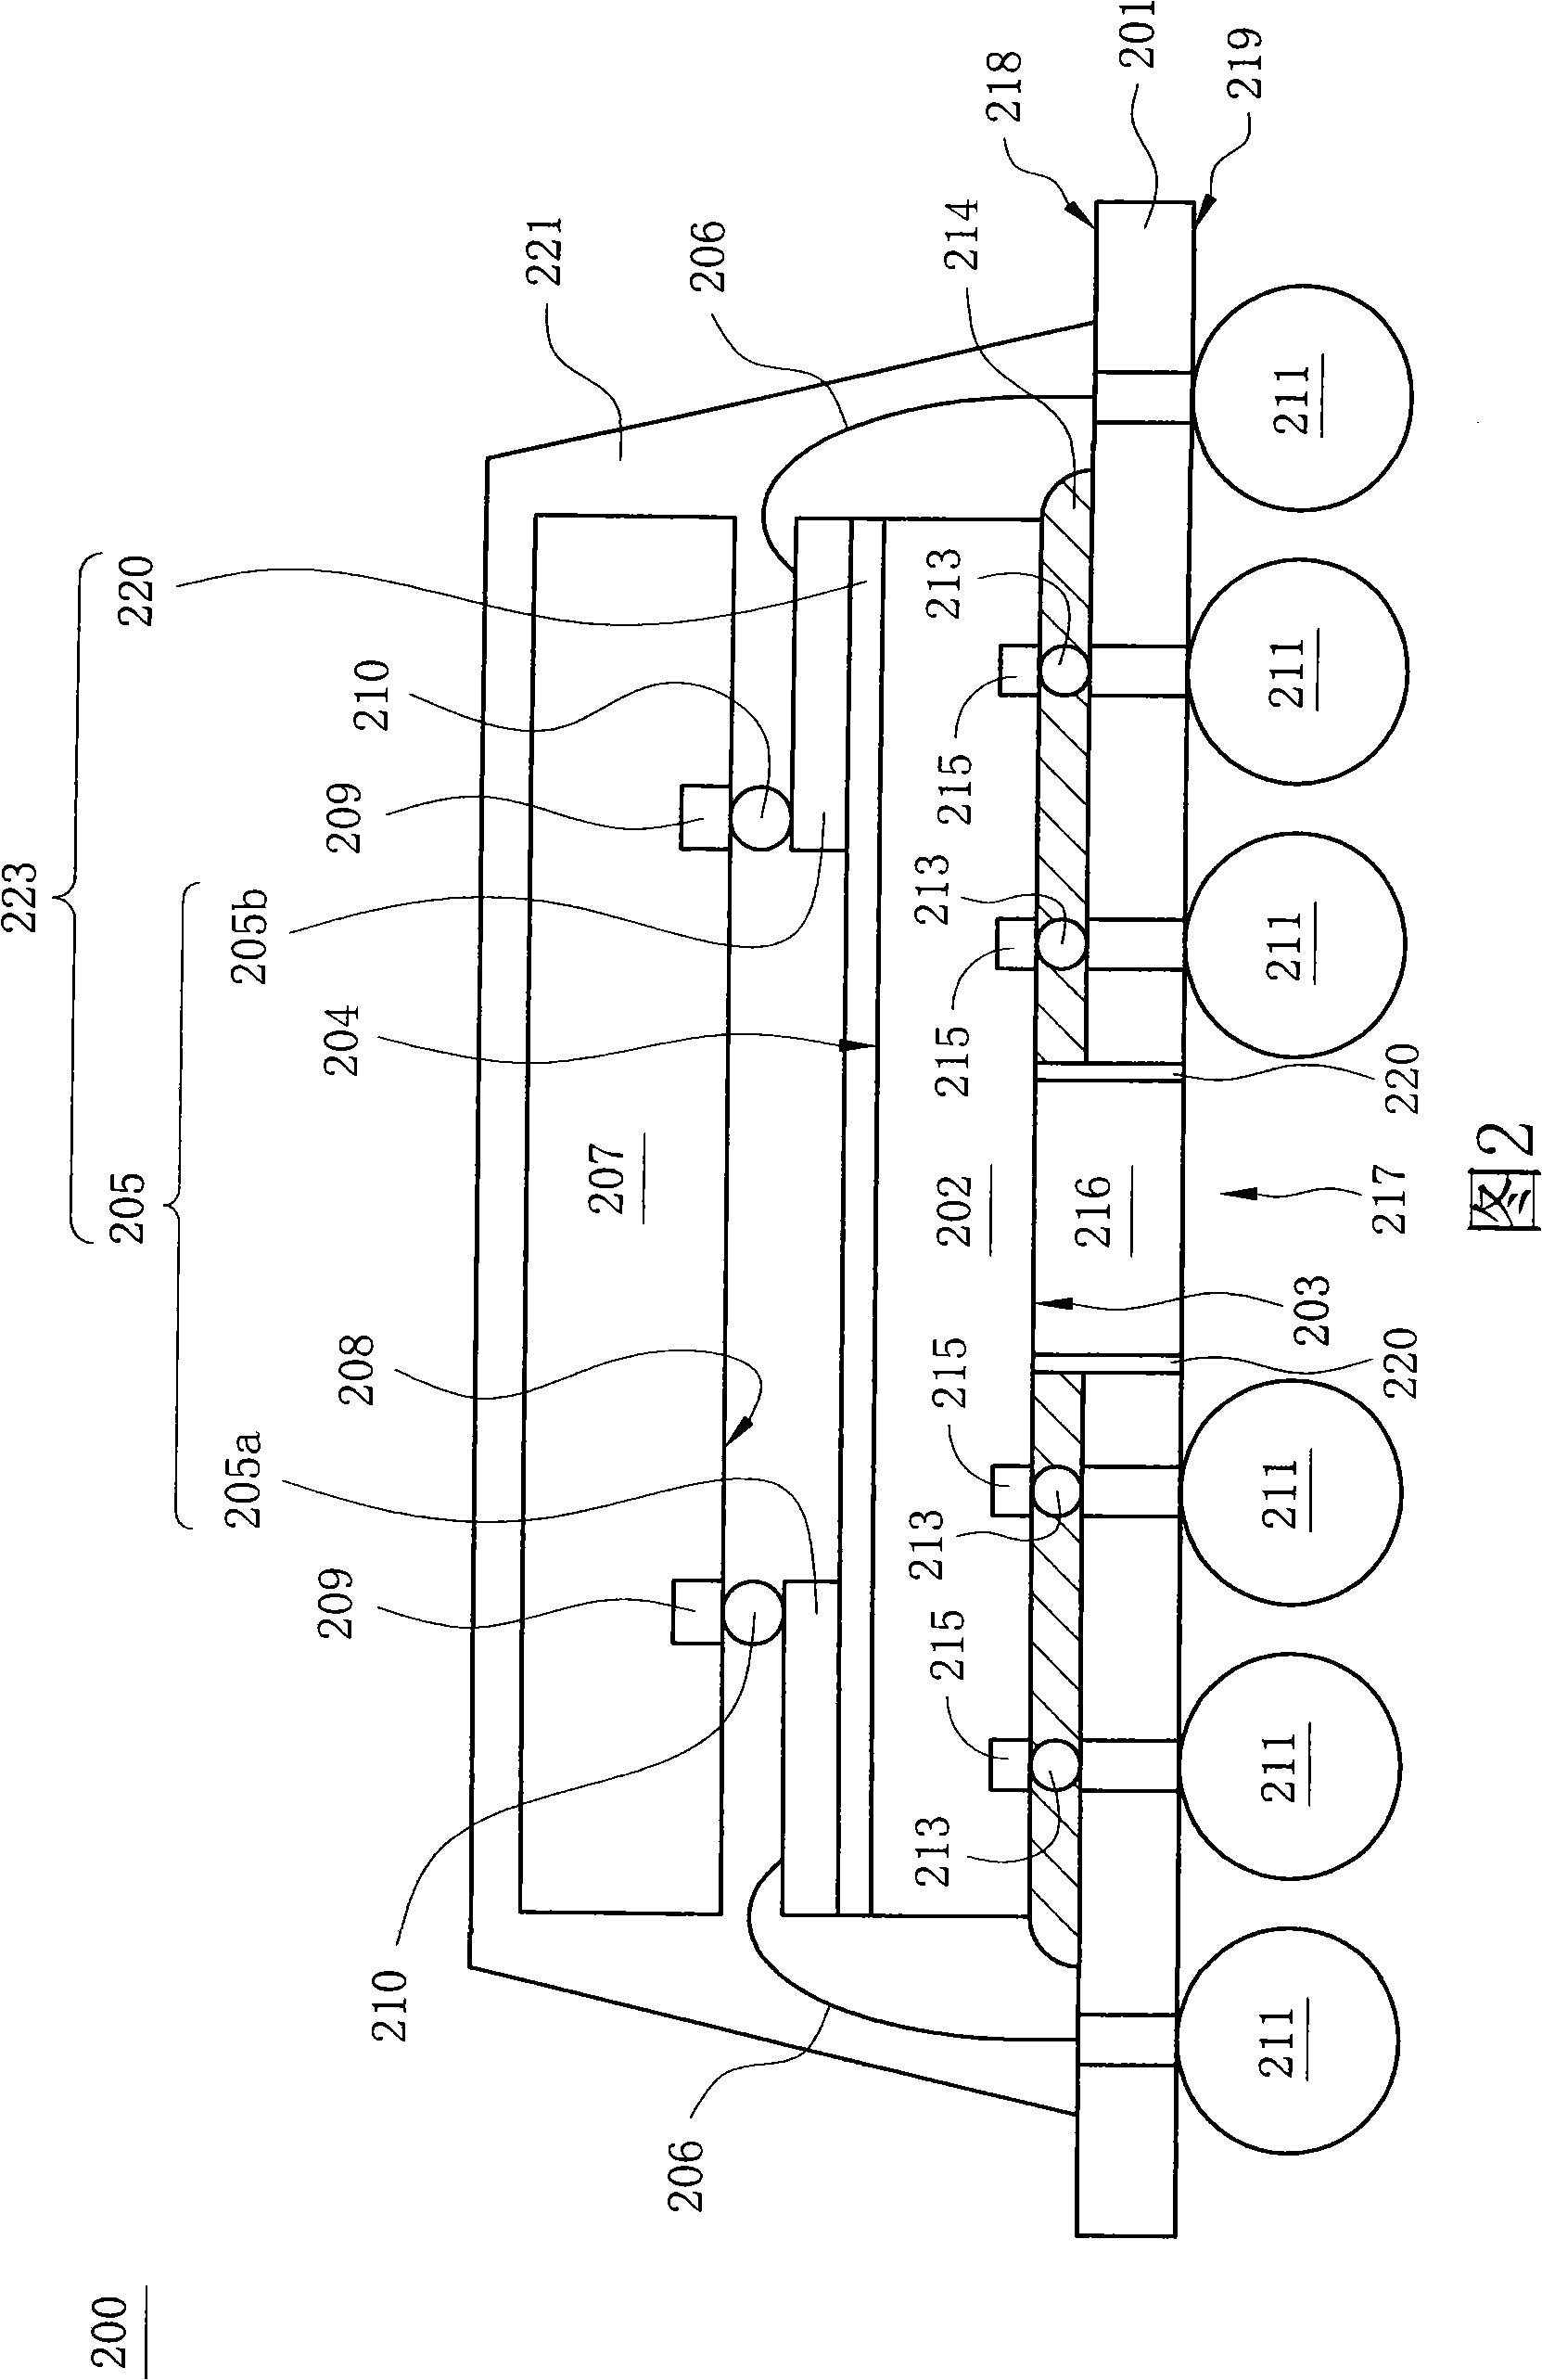 Chip stack packaging structure and method of producing the same